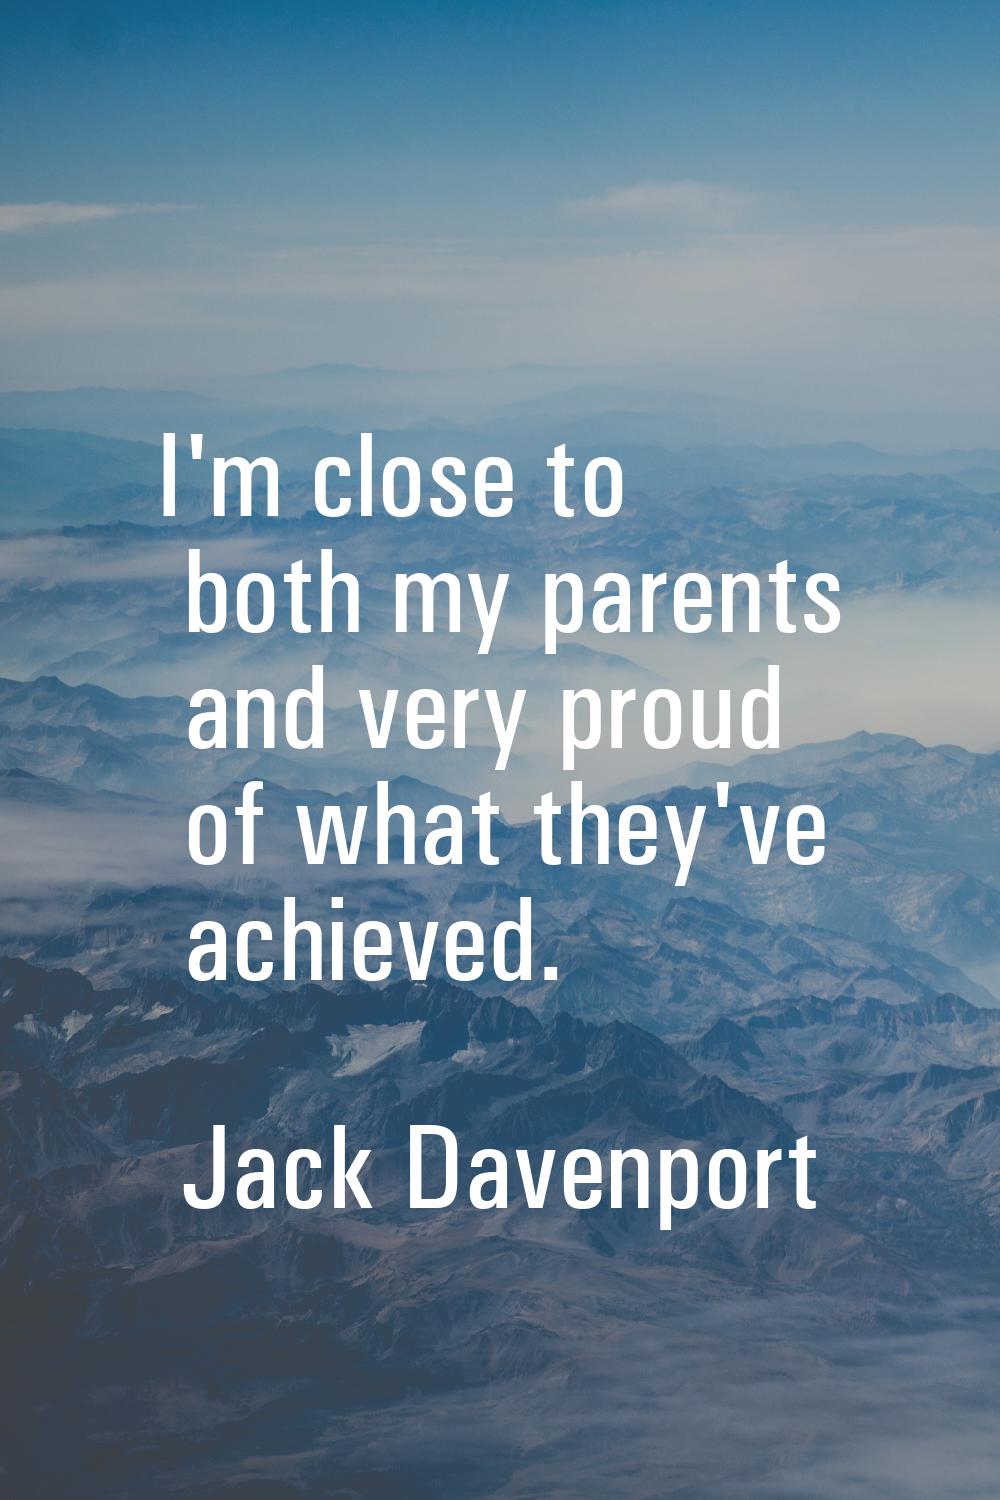 I'm close to both my parents and very proud of what they've achieved.